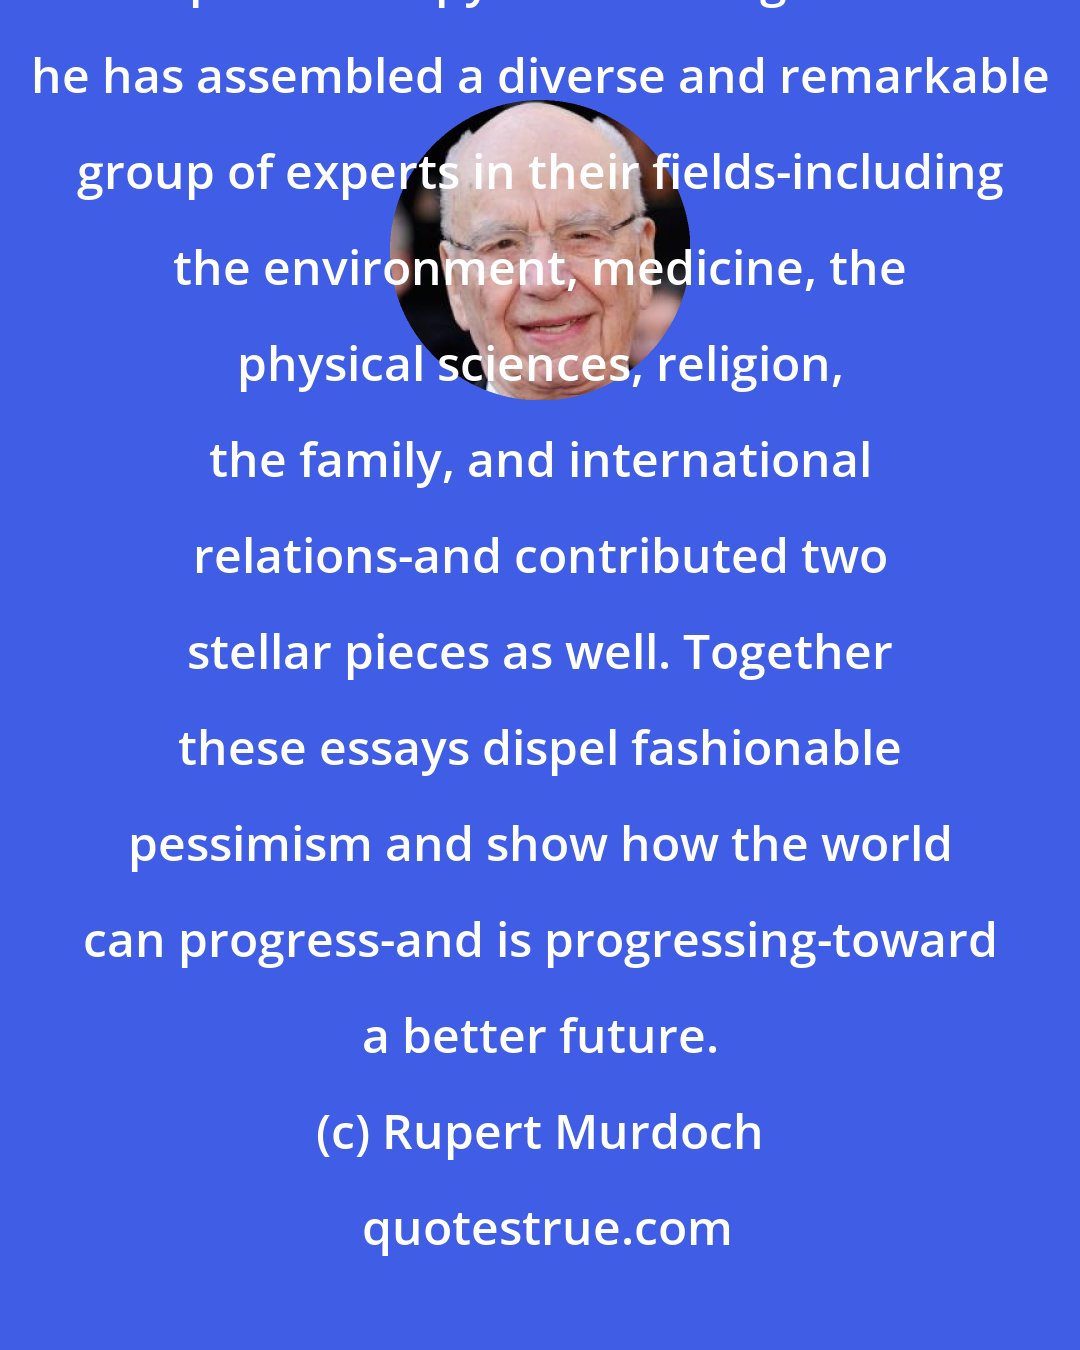 Rupert Murdoch: John Marks Templeton has achieved exemplary success in both business and philanthropy. For Looking Forward he has assembled a diverse and remarkable group of experts in their fields-including the environment, medicine, the physical sciences, religion, the family, and international relations-and contributed two stellar pieces as well. Together these essays dispel fashionable pessimism and show how the world can progress-and is progressing-toward a better future.